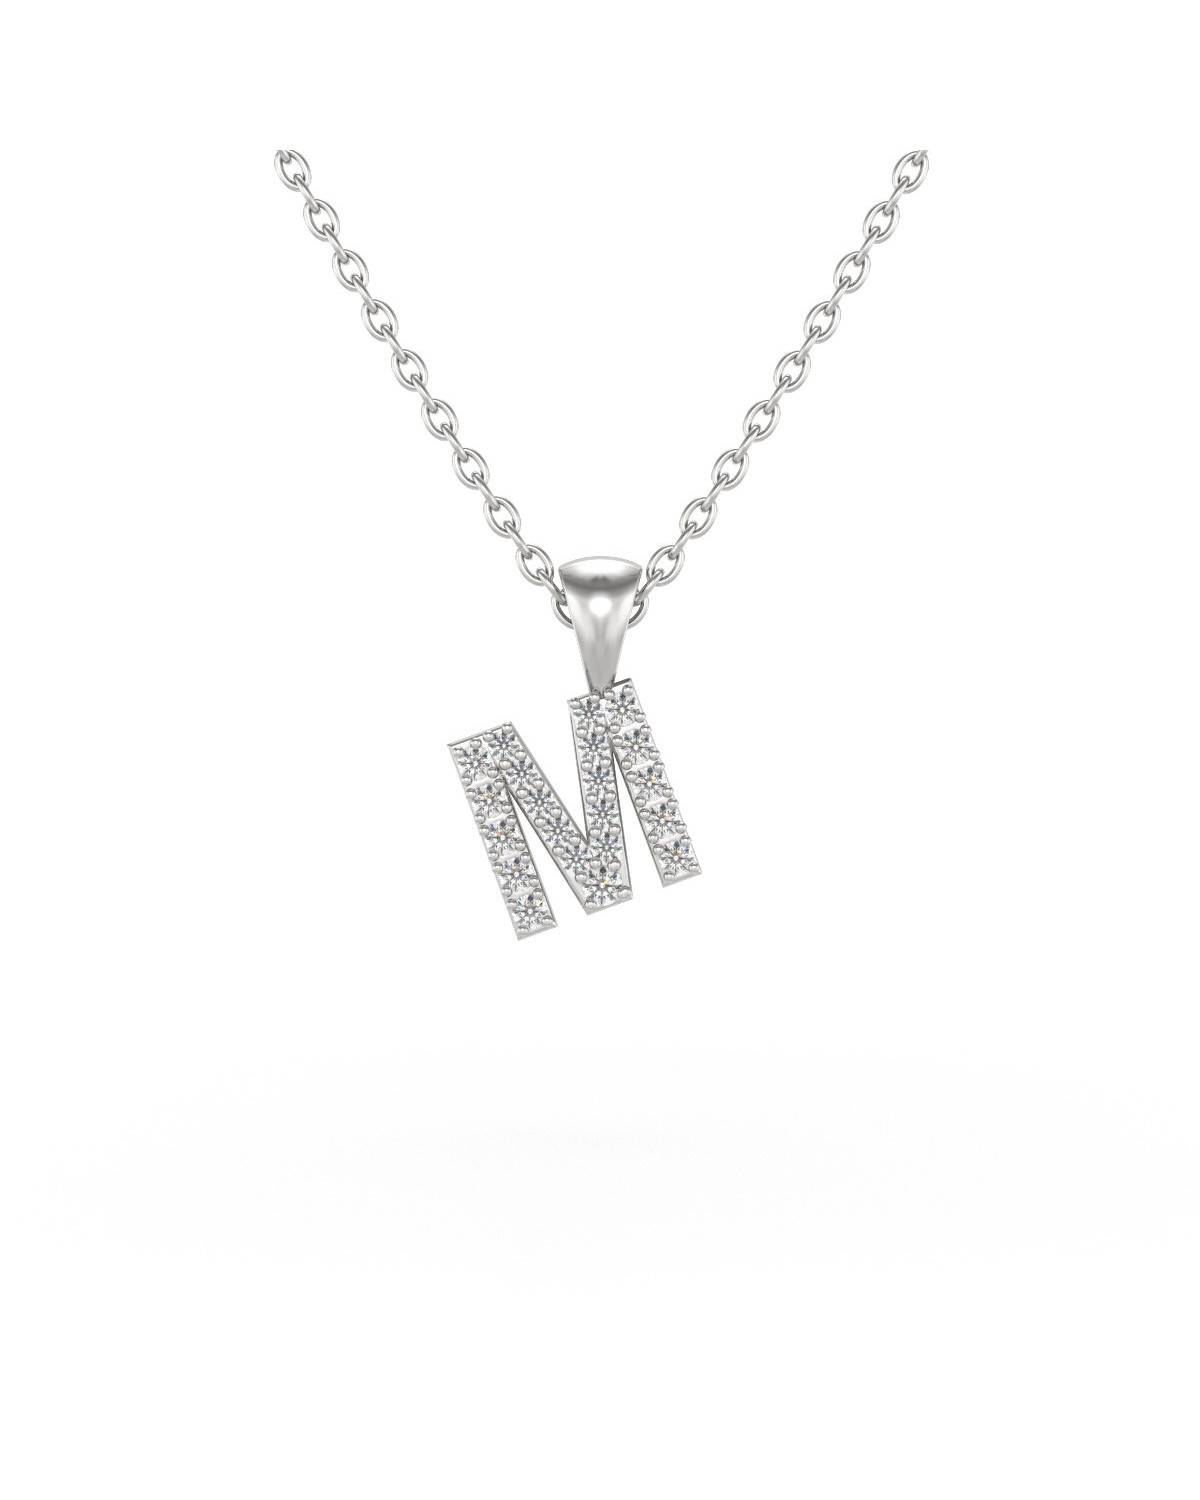 Collier Pendentif Lettre M Or Blanc Diamant Chaine Or incluse 0.72grs